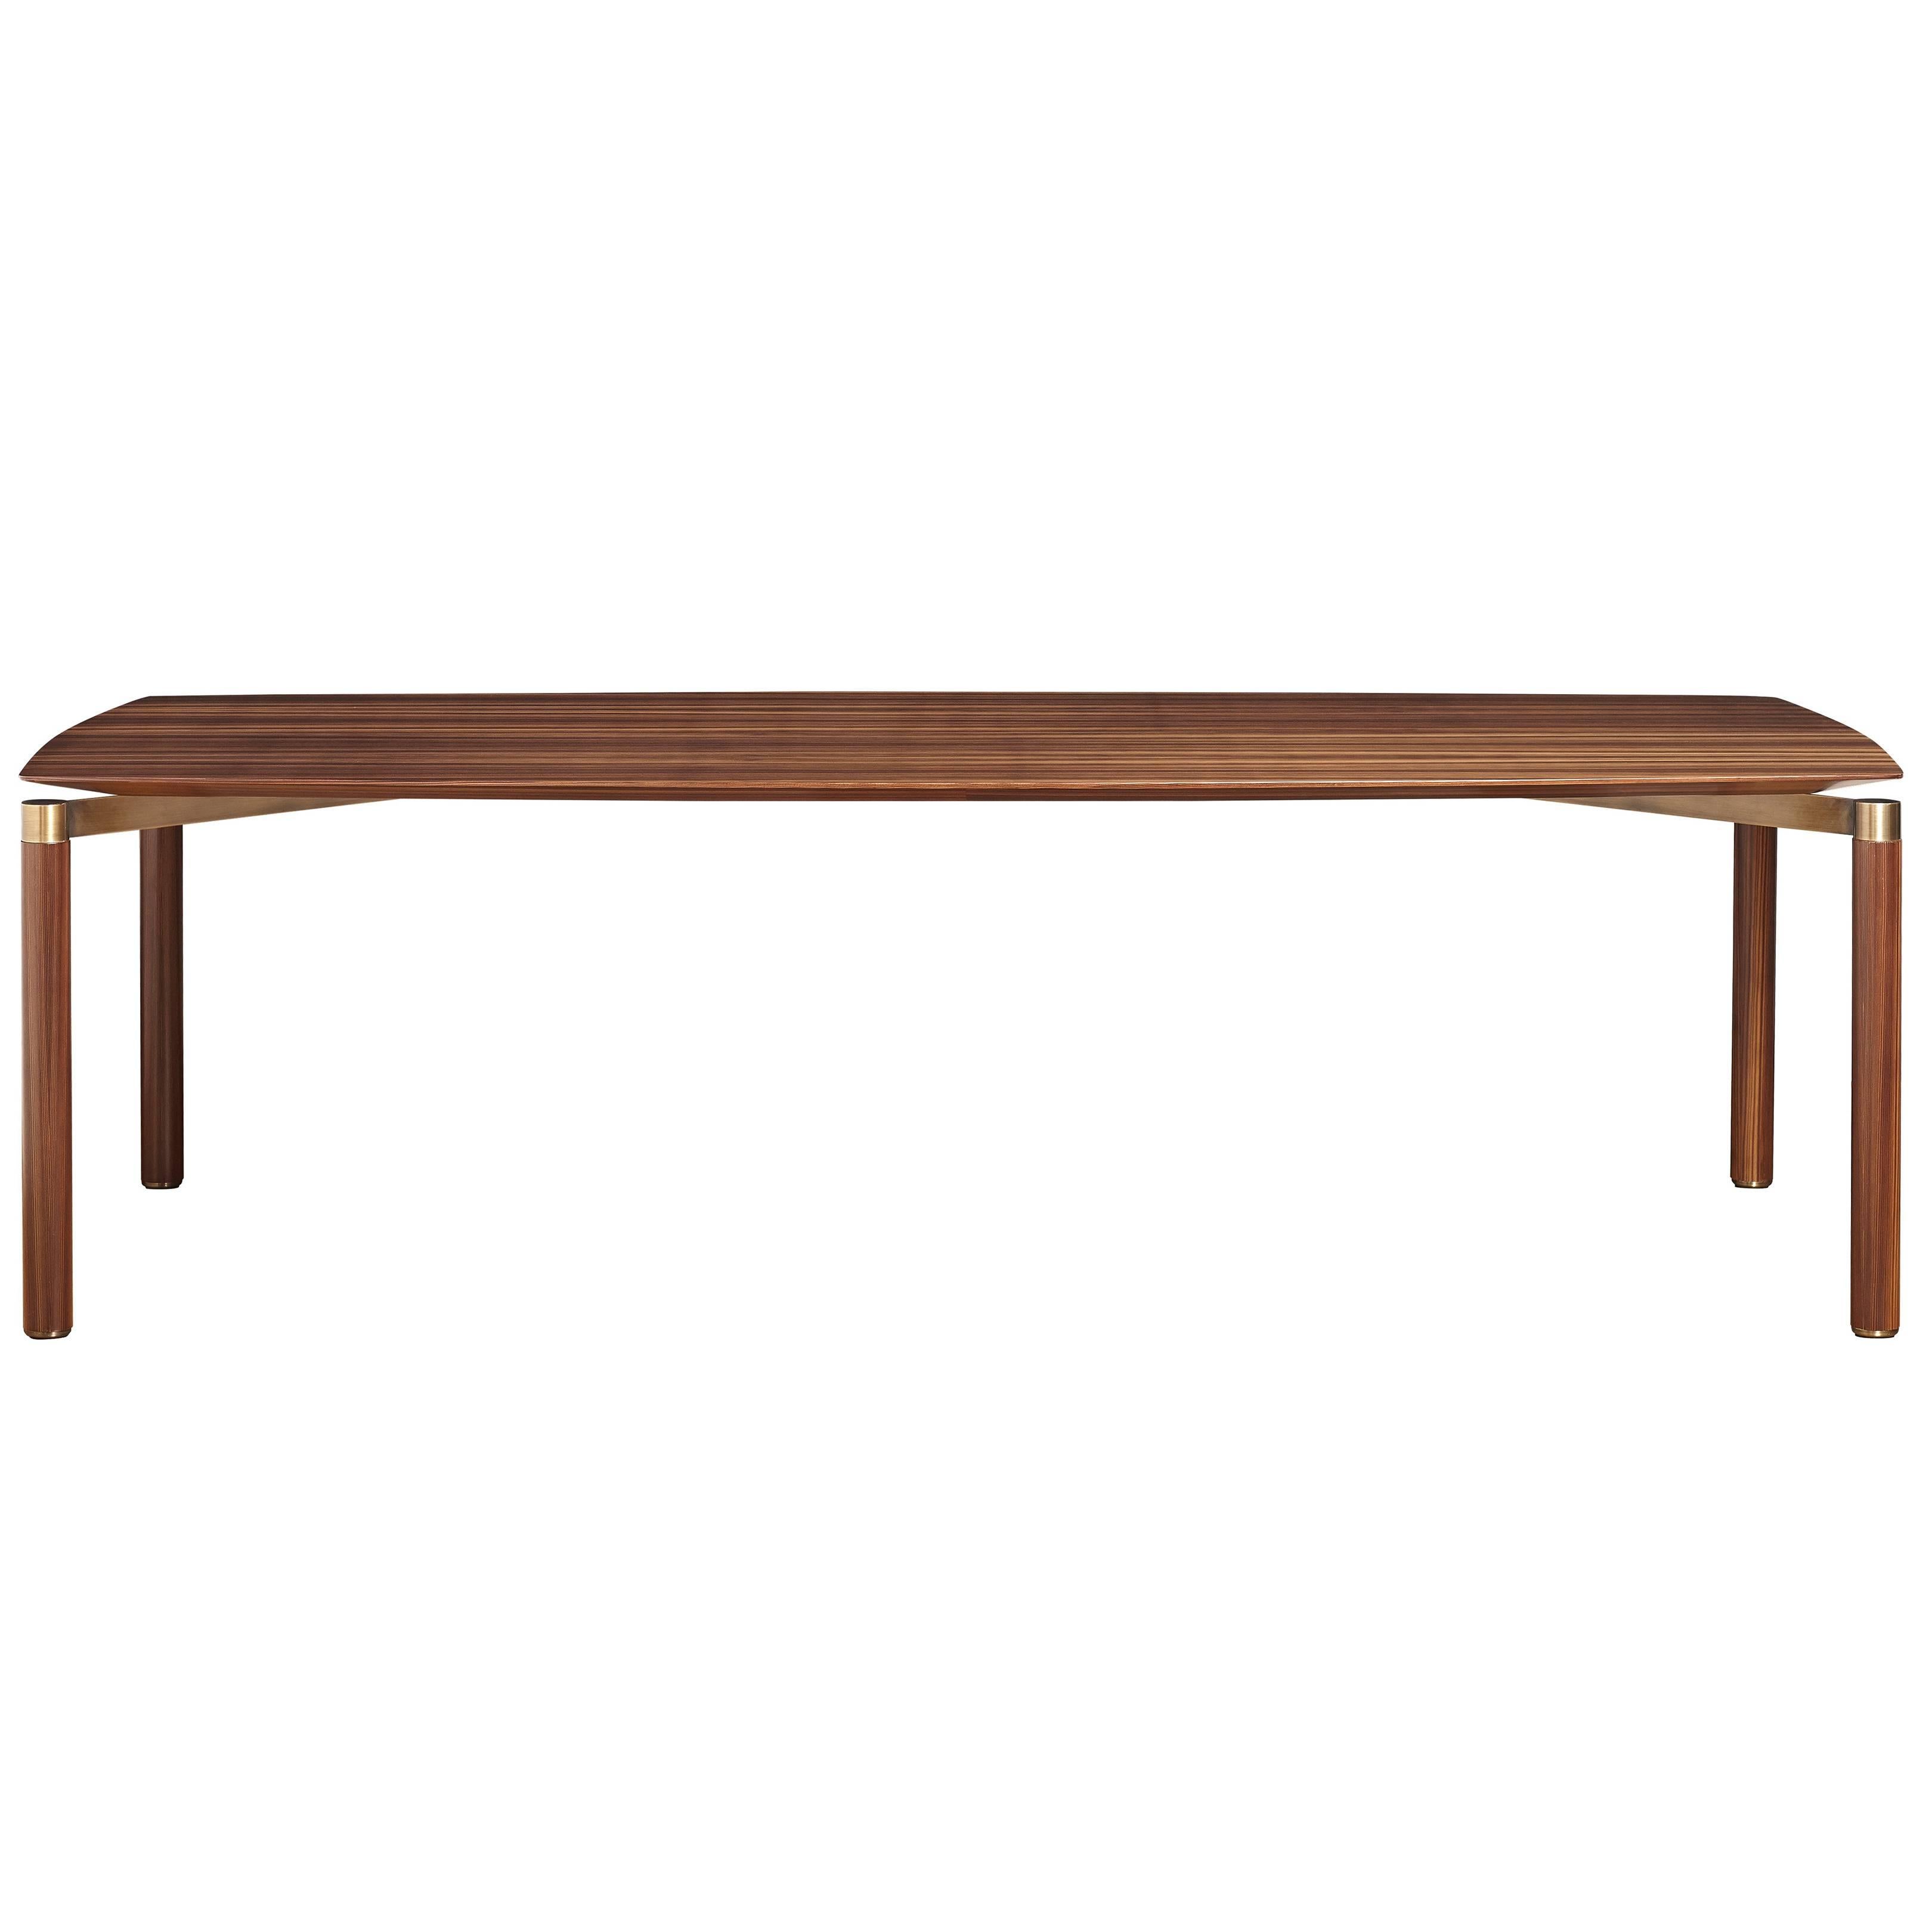 "RAJ" in Smoked Pine and Stainless Steel Dining Table 